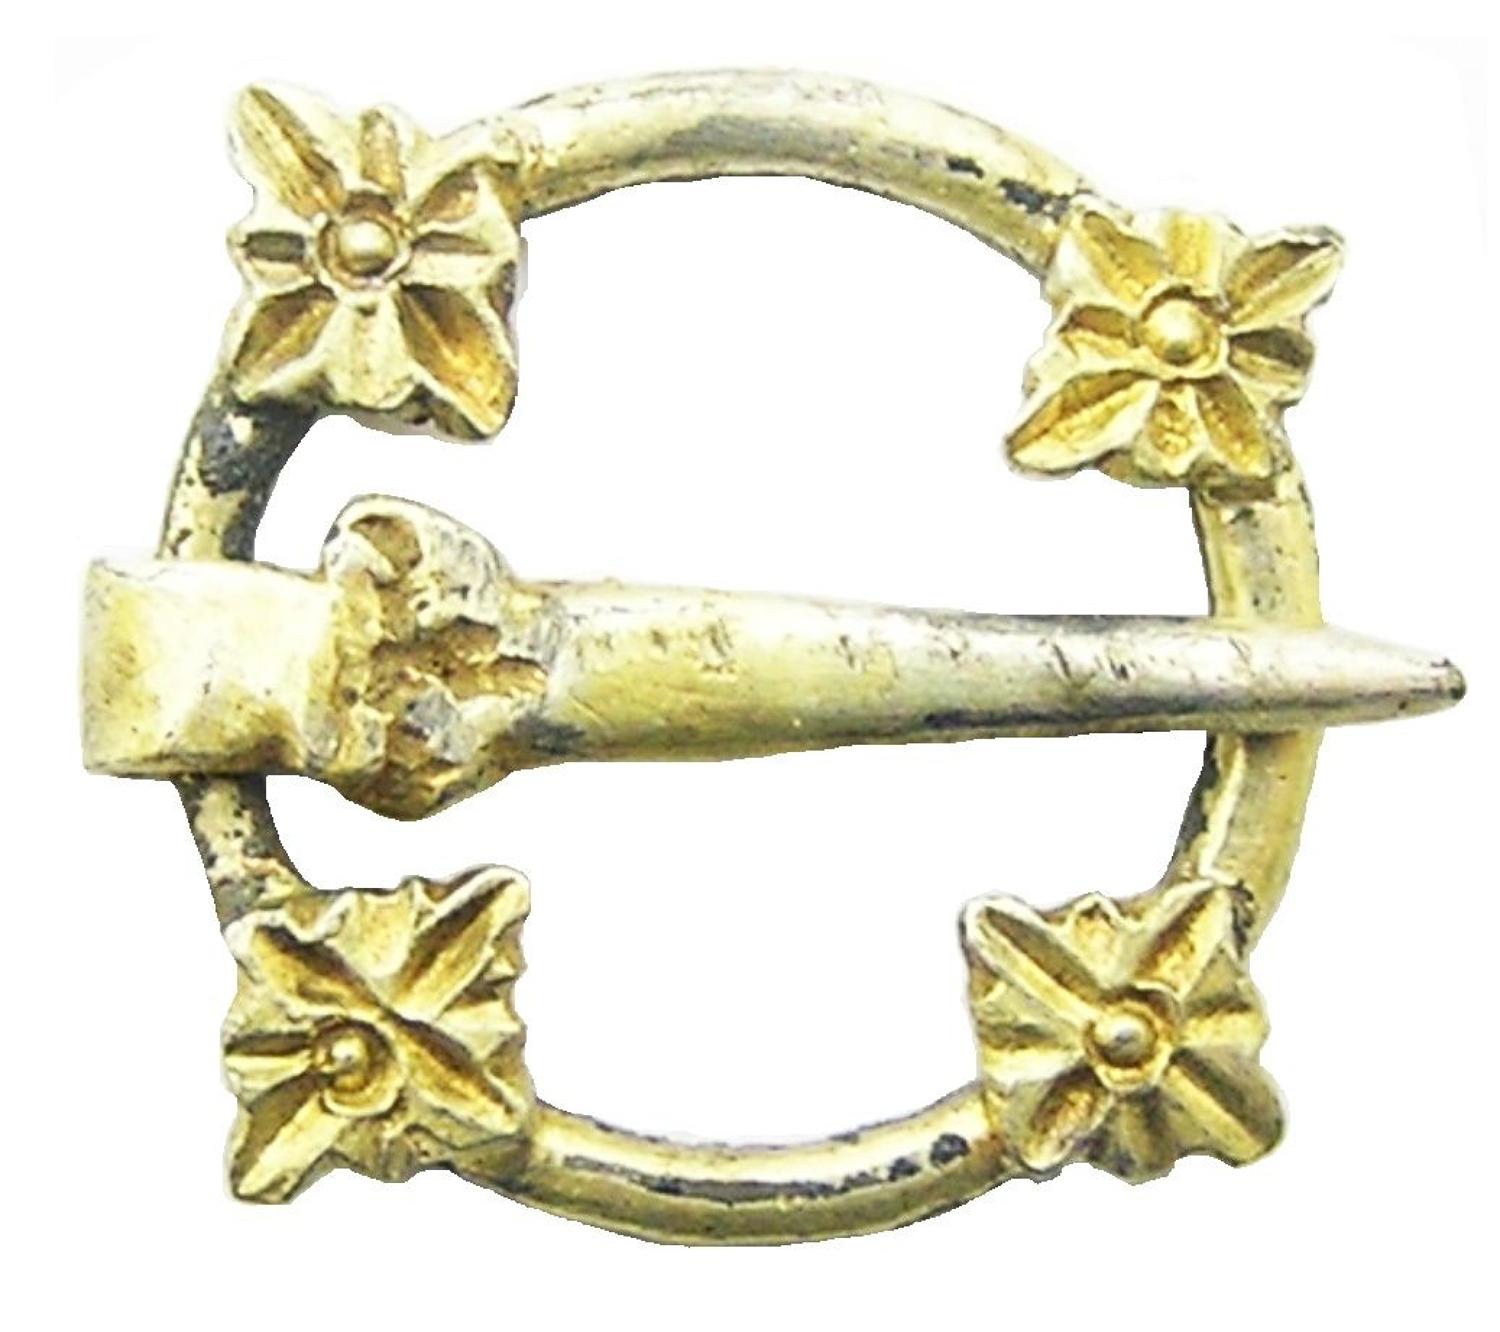 Medieval silver-gilt decorated ring-brooch